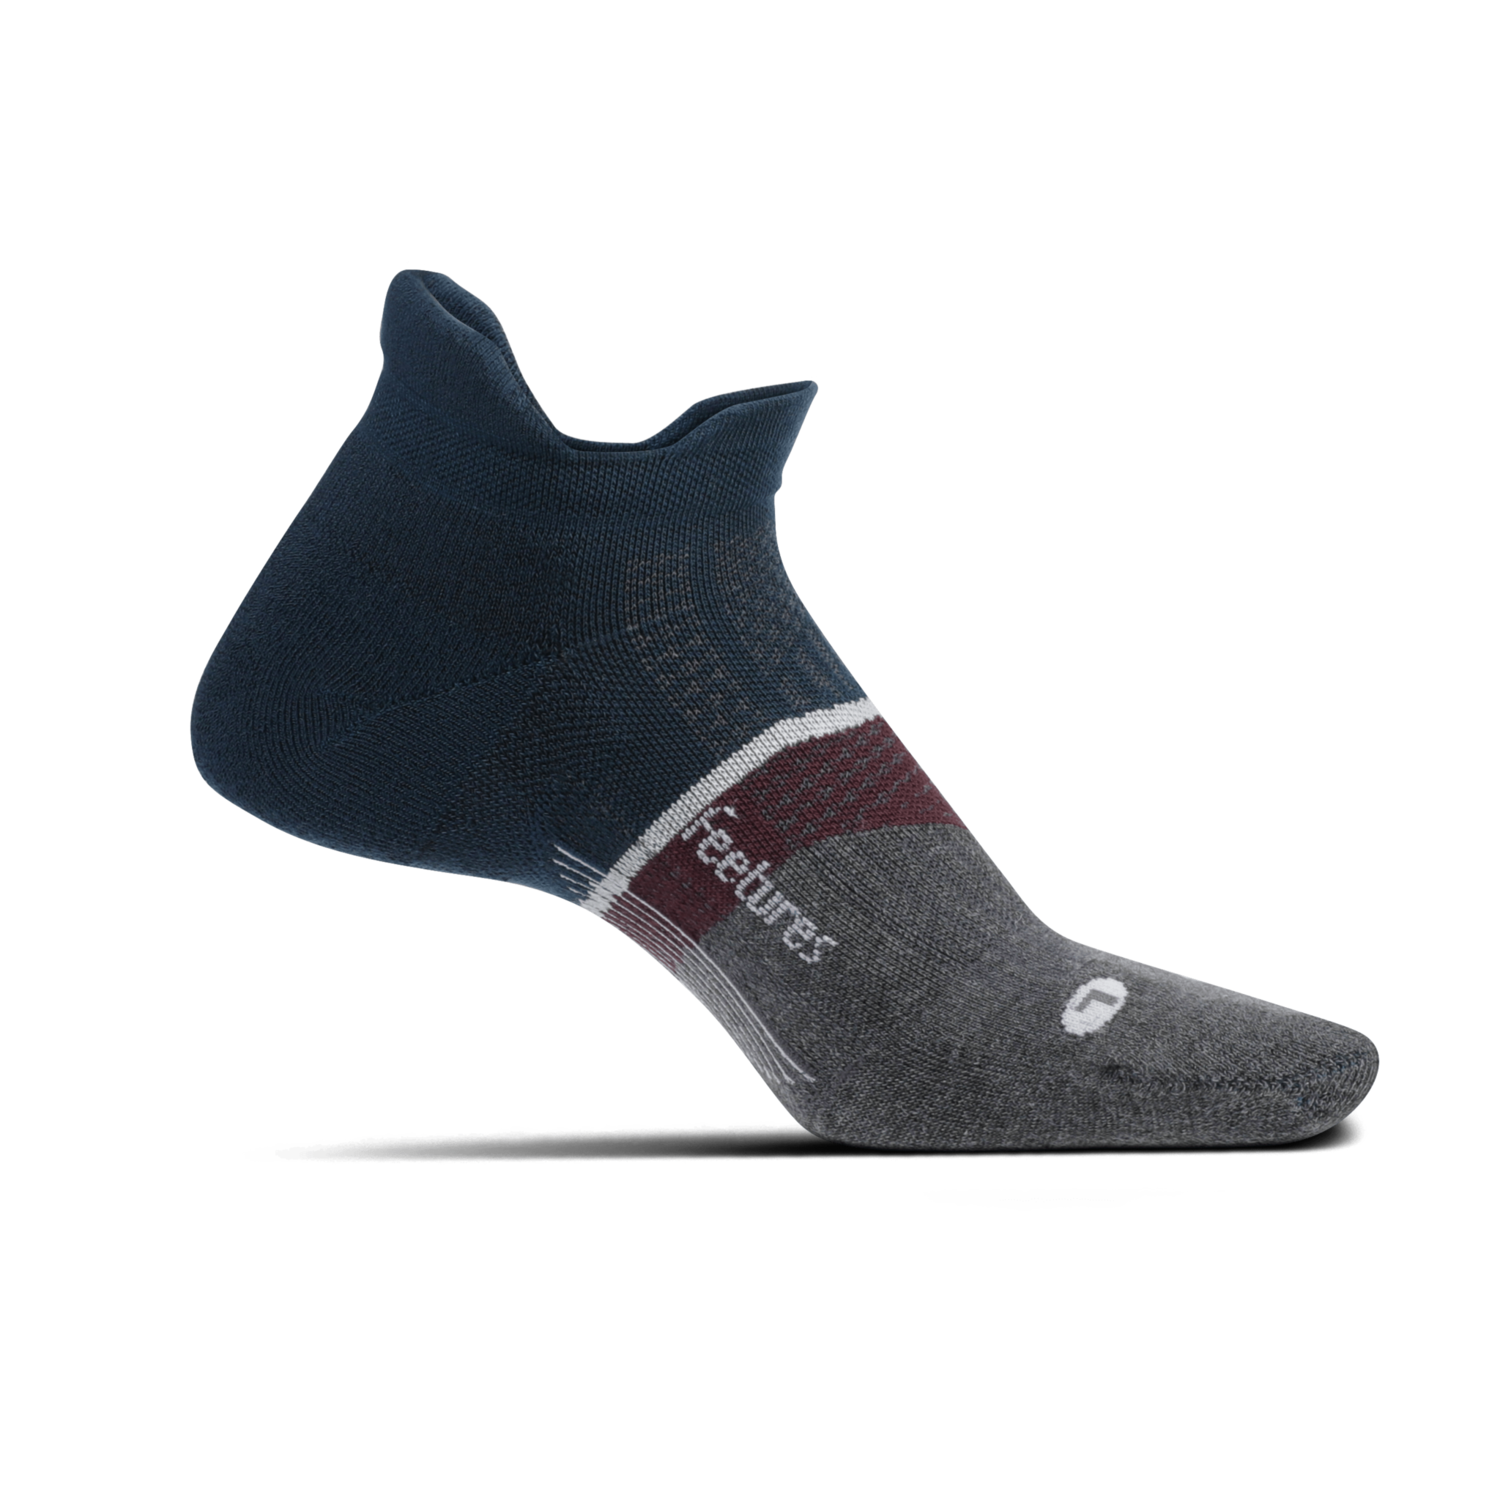 Medial view of the Feetures Elite Ultra Light sock in the color French Blue Navy.